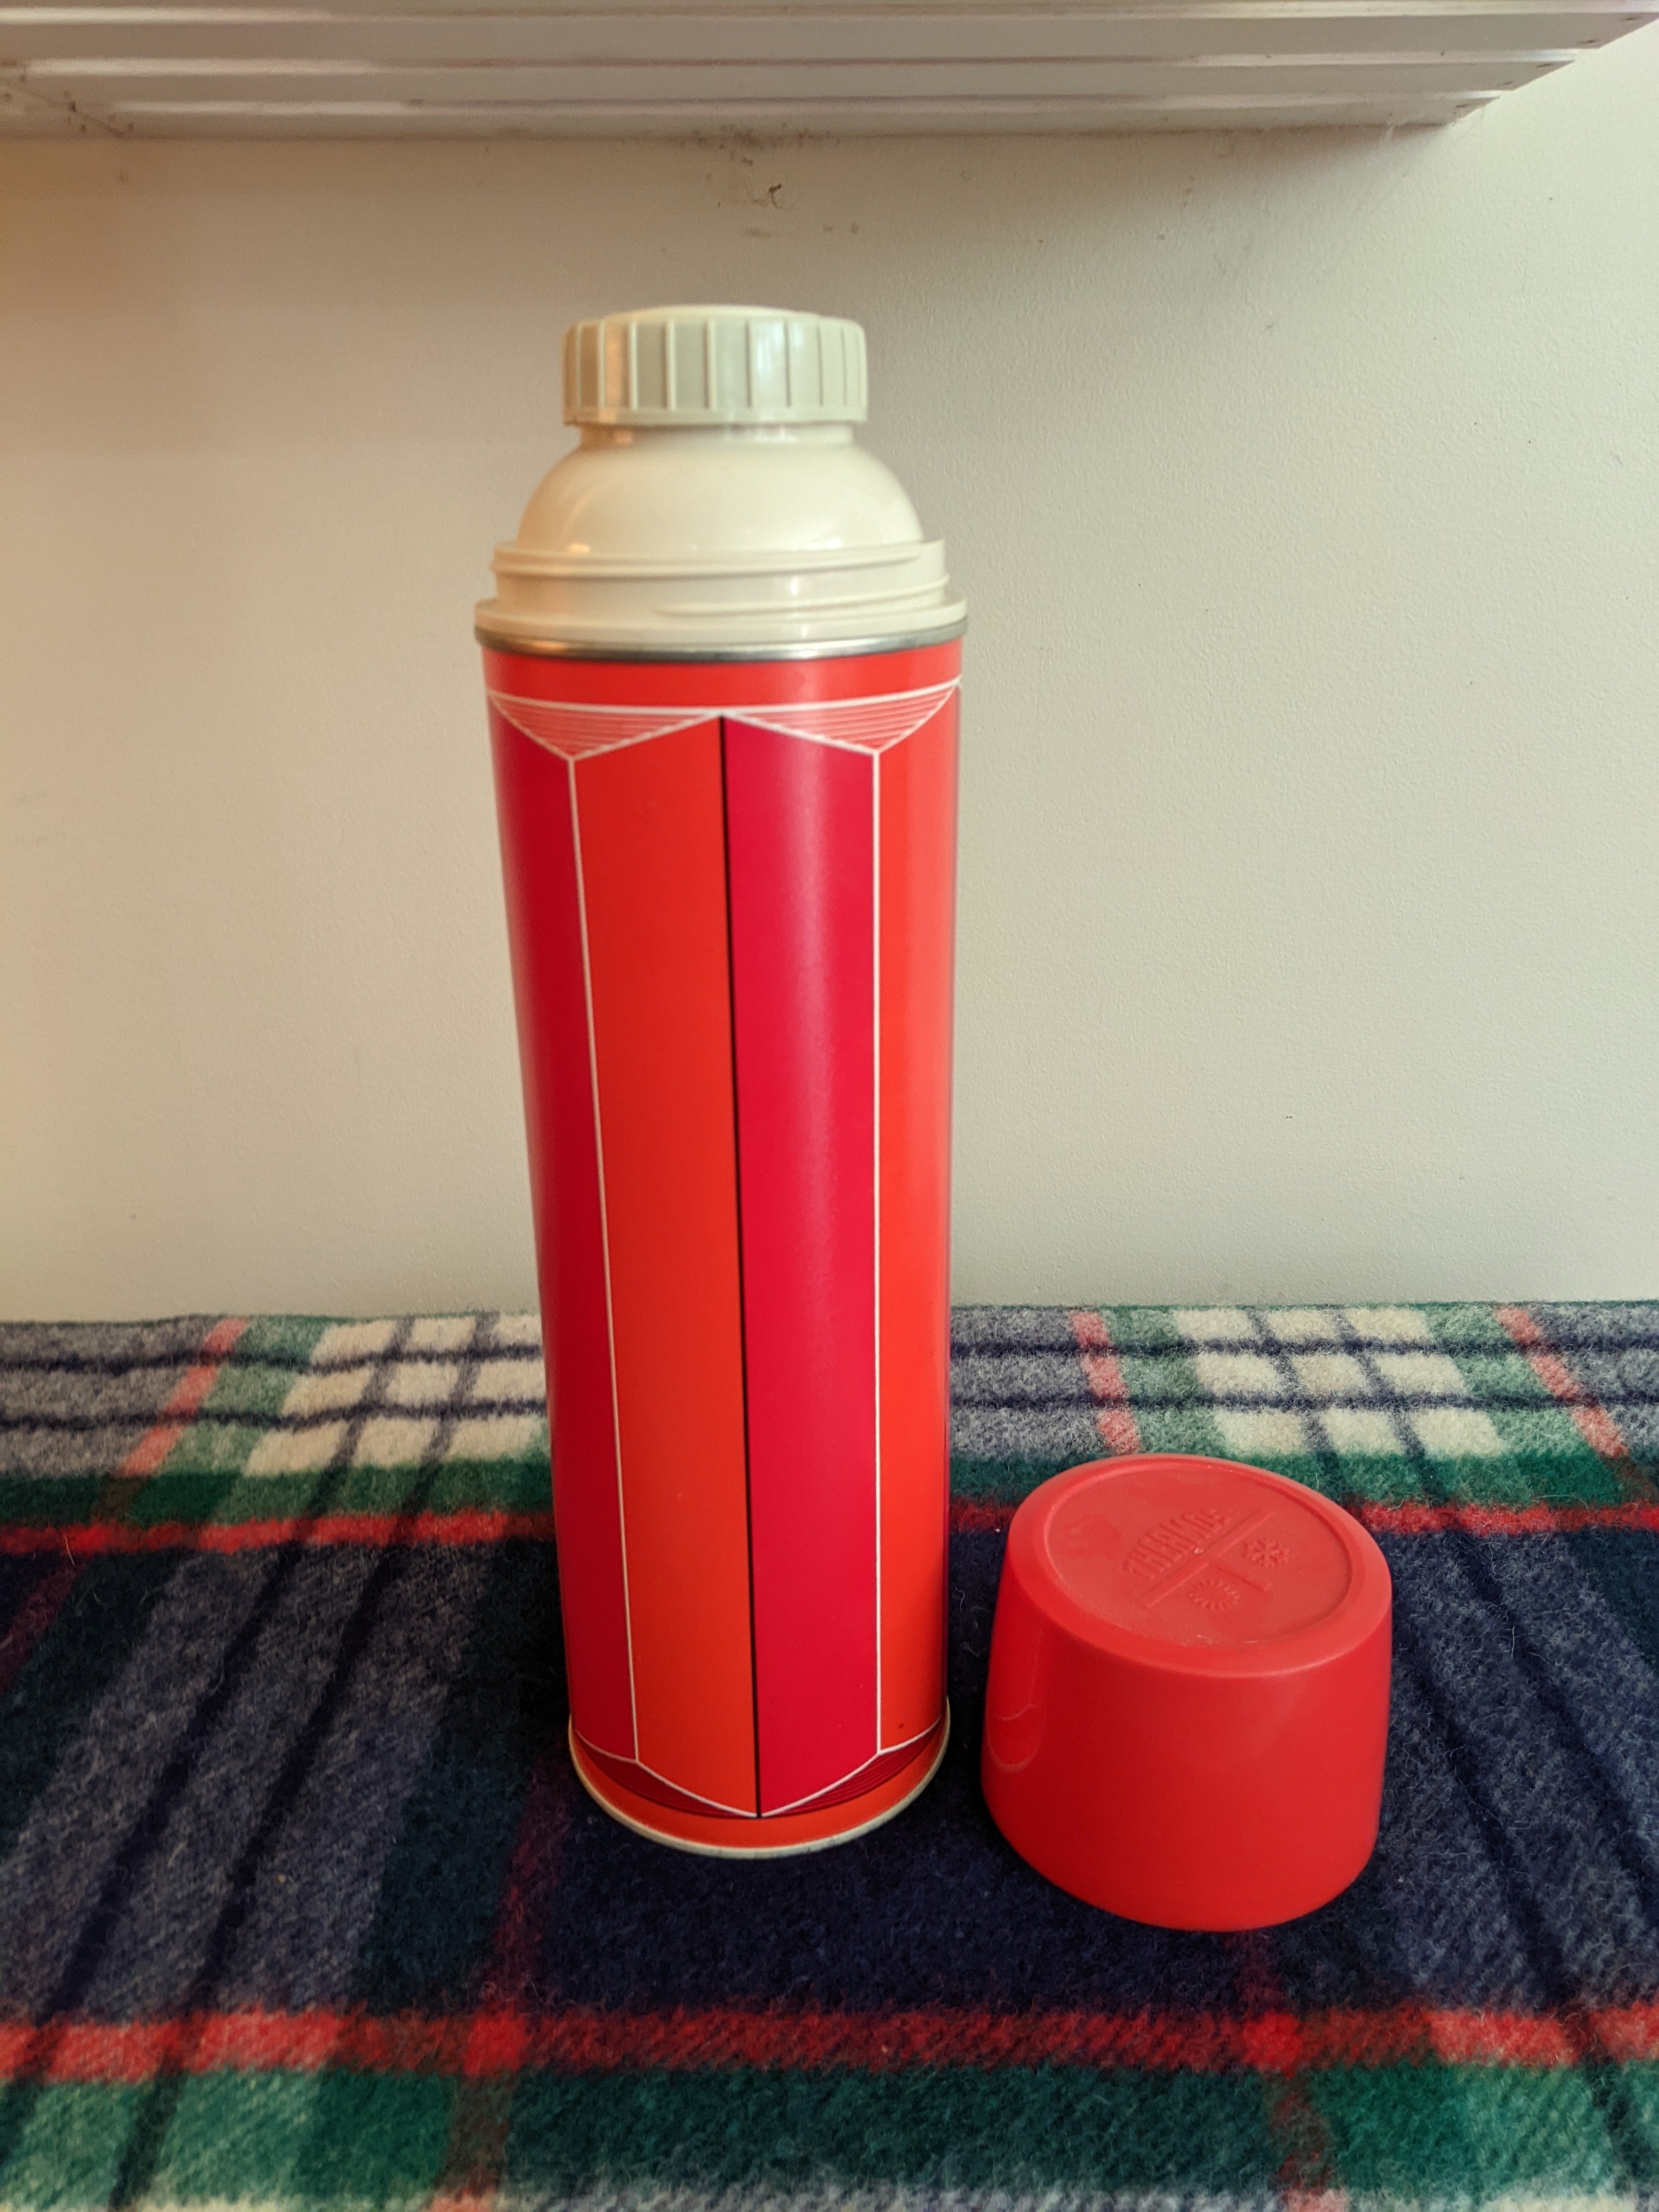 Red Plaid Insulated Thermos,1970s,,2842,coffee Thermos,small 8 Oz Hot  Beverage Thermos,camping,picnic,distressed,1960s 